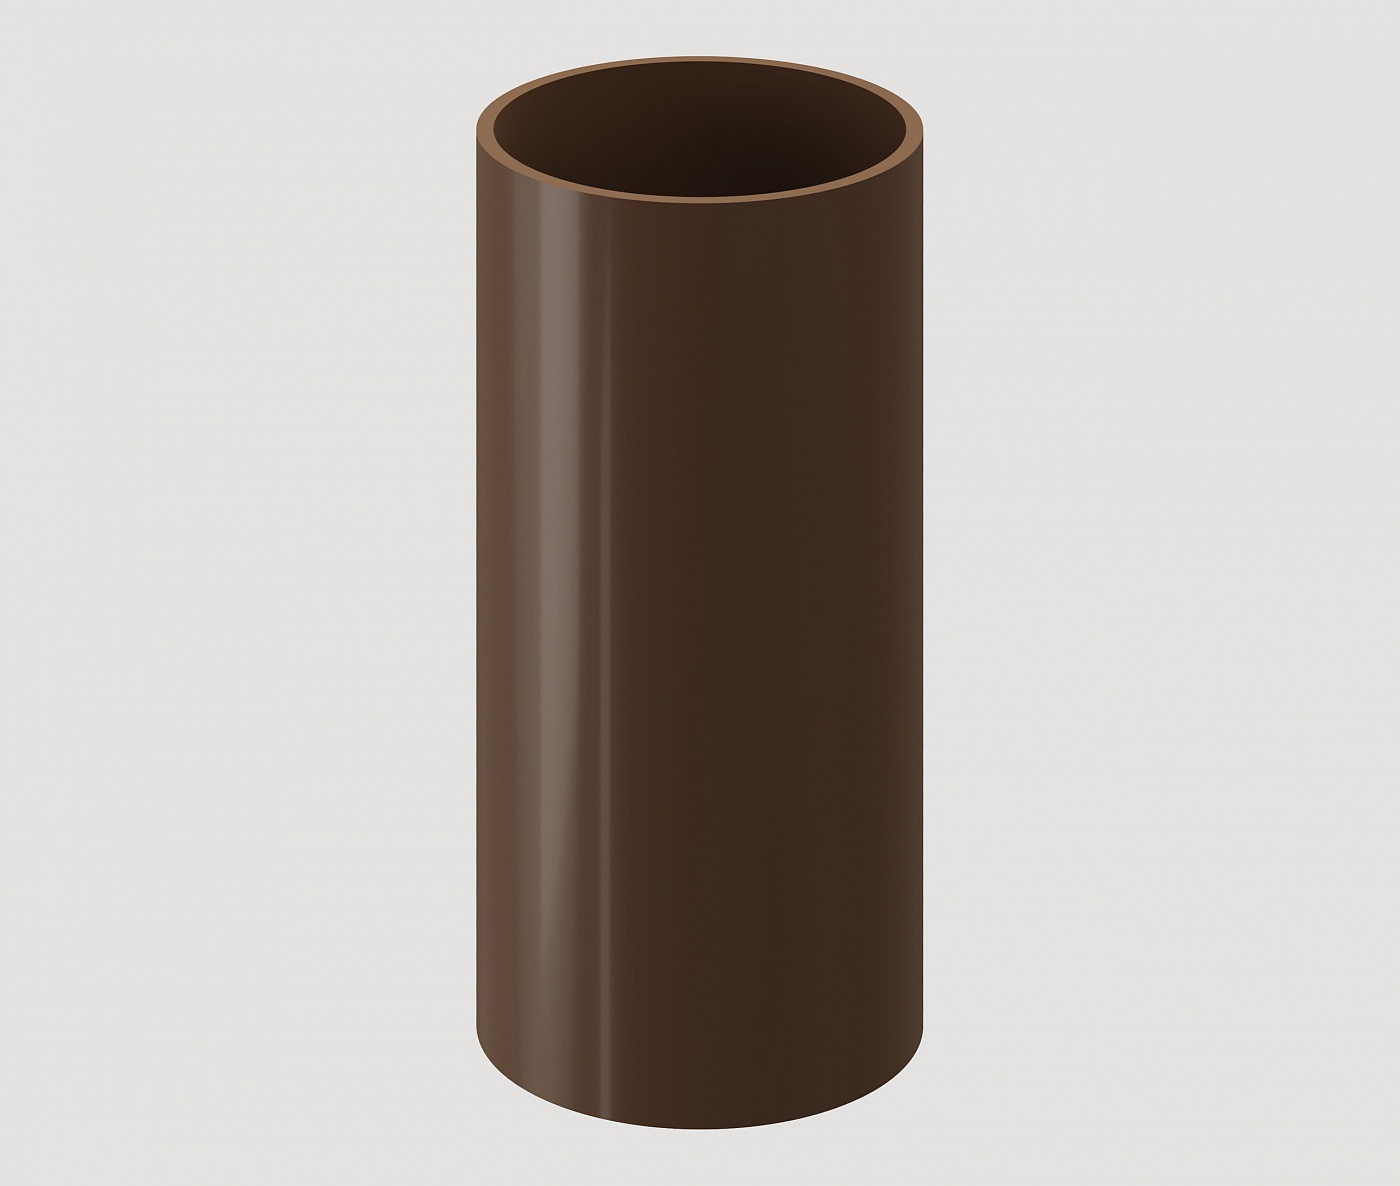 Водостоки - STANDARD SERIES Light brown RAL 8019 - Elements of the drainage system - Pipe 2m